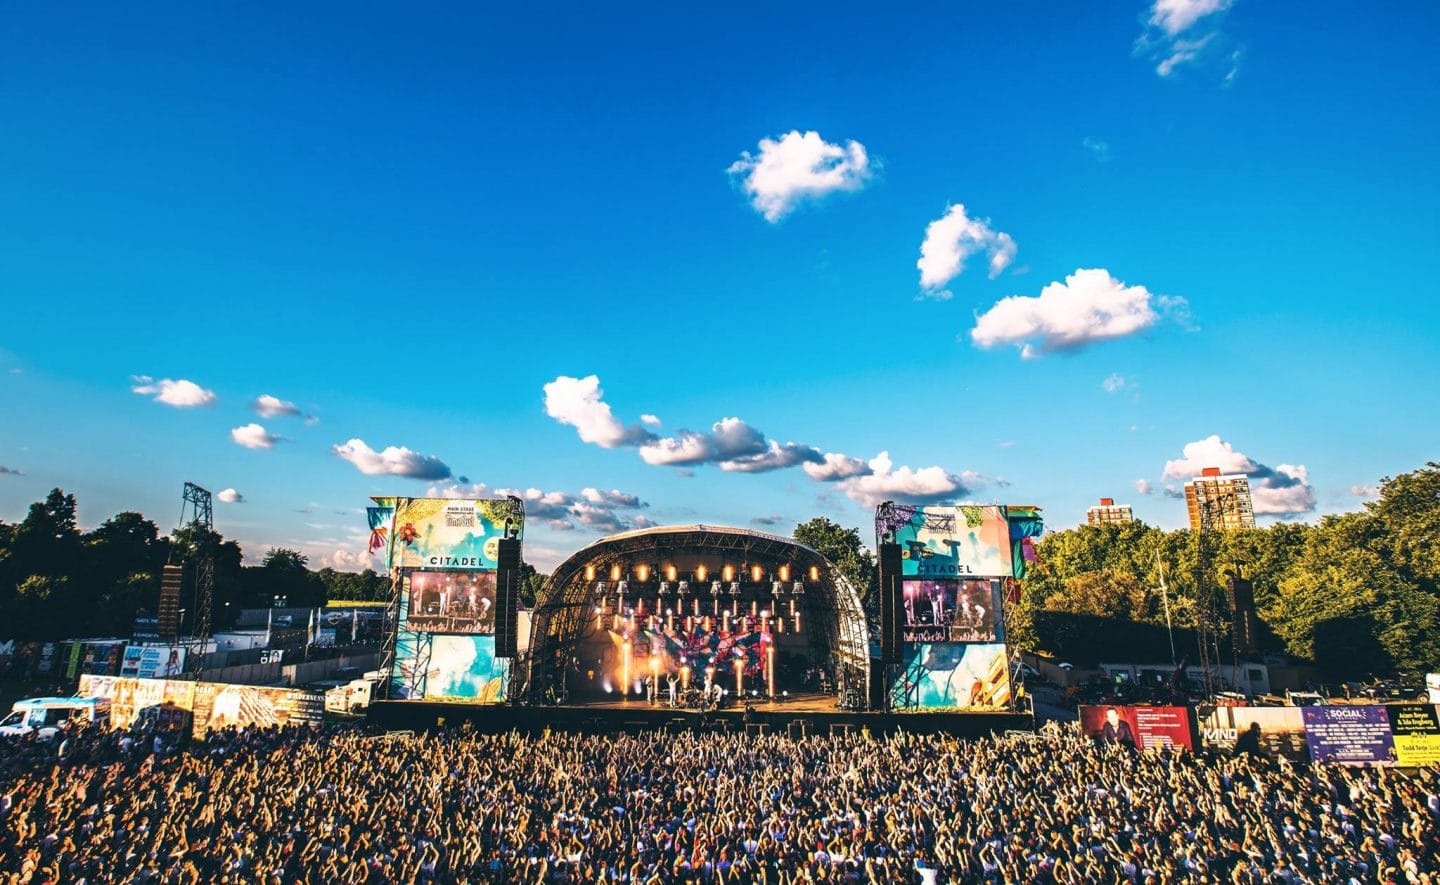 The 2020 Festival Guide featuring [@afronation],[@LoveboxFestival], [@southwest4] & more